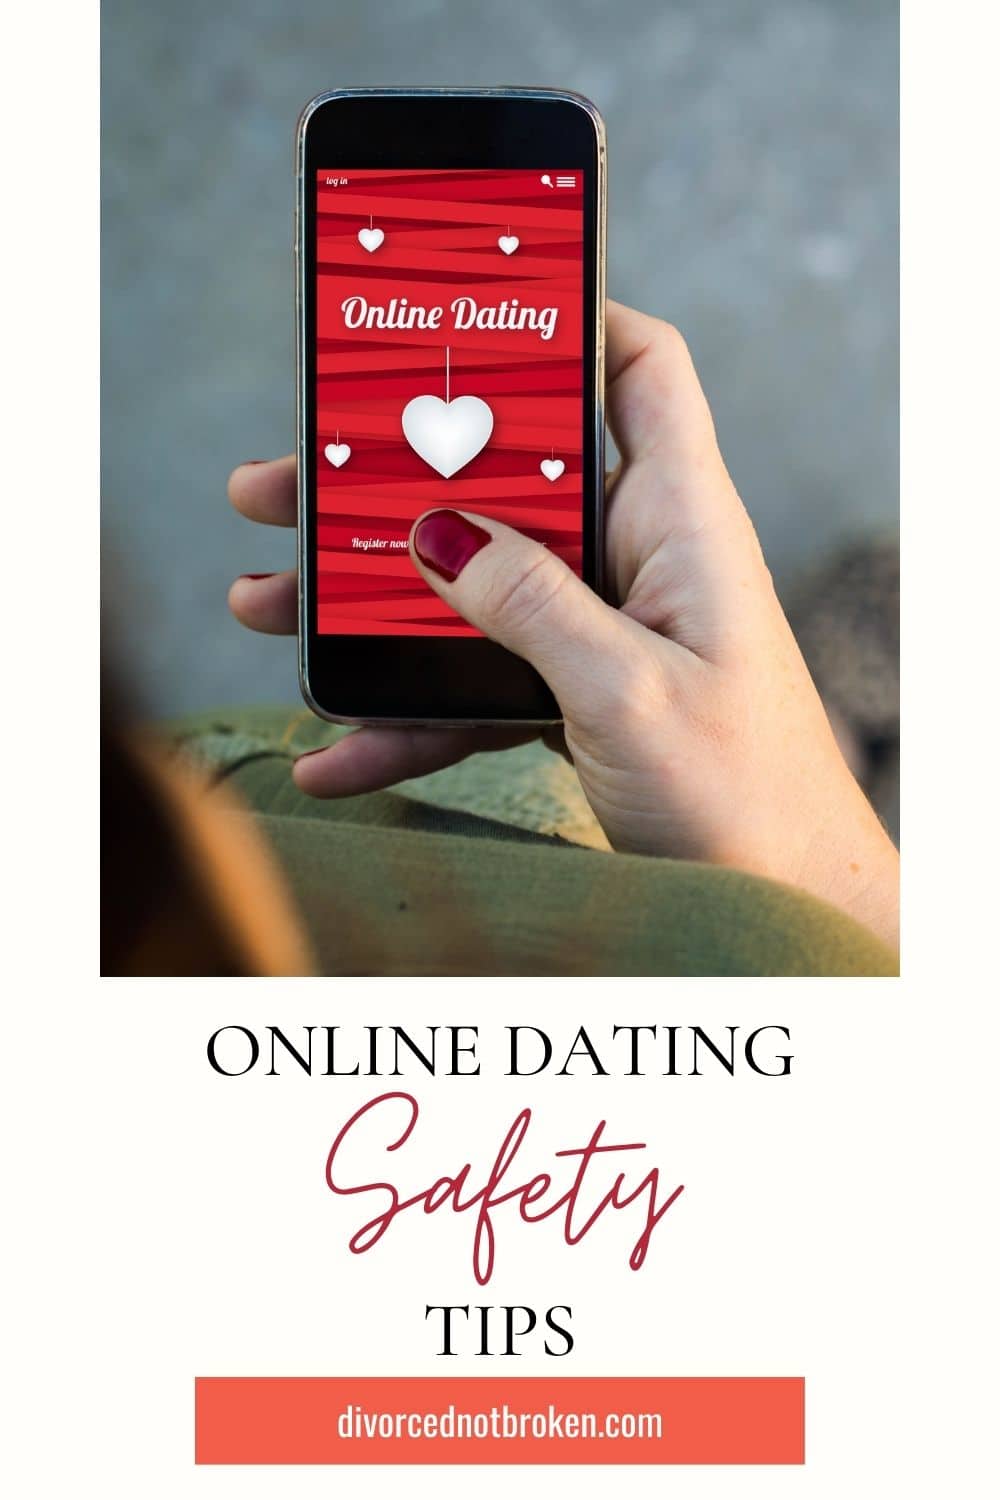 A woman's hand with red nail polish holding a cell phone with an online dating app on the screen.